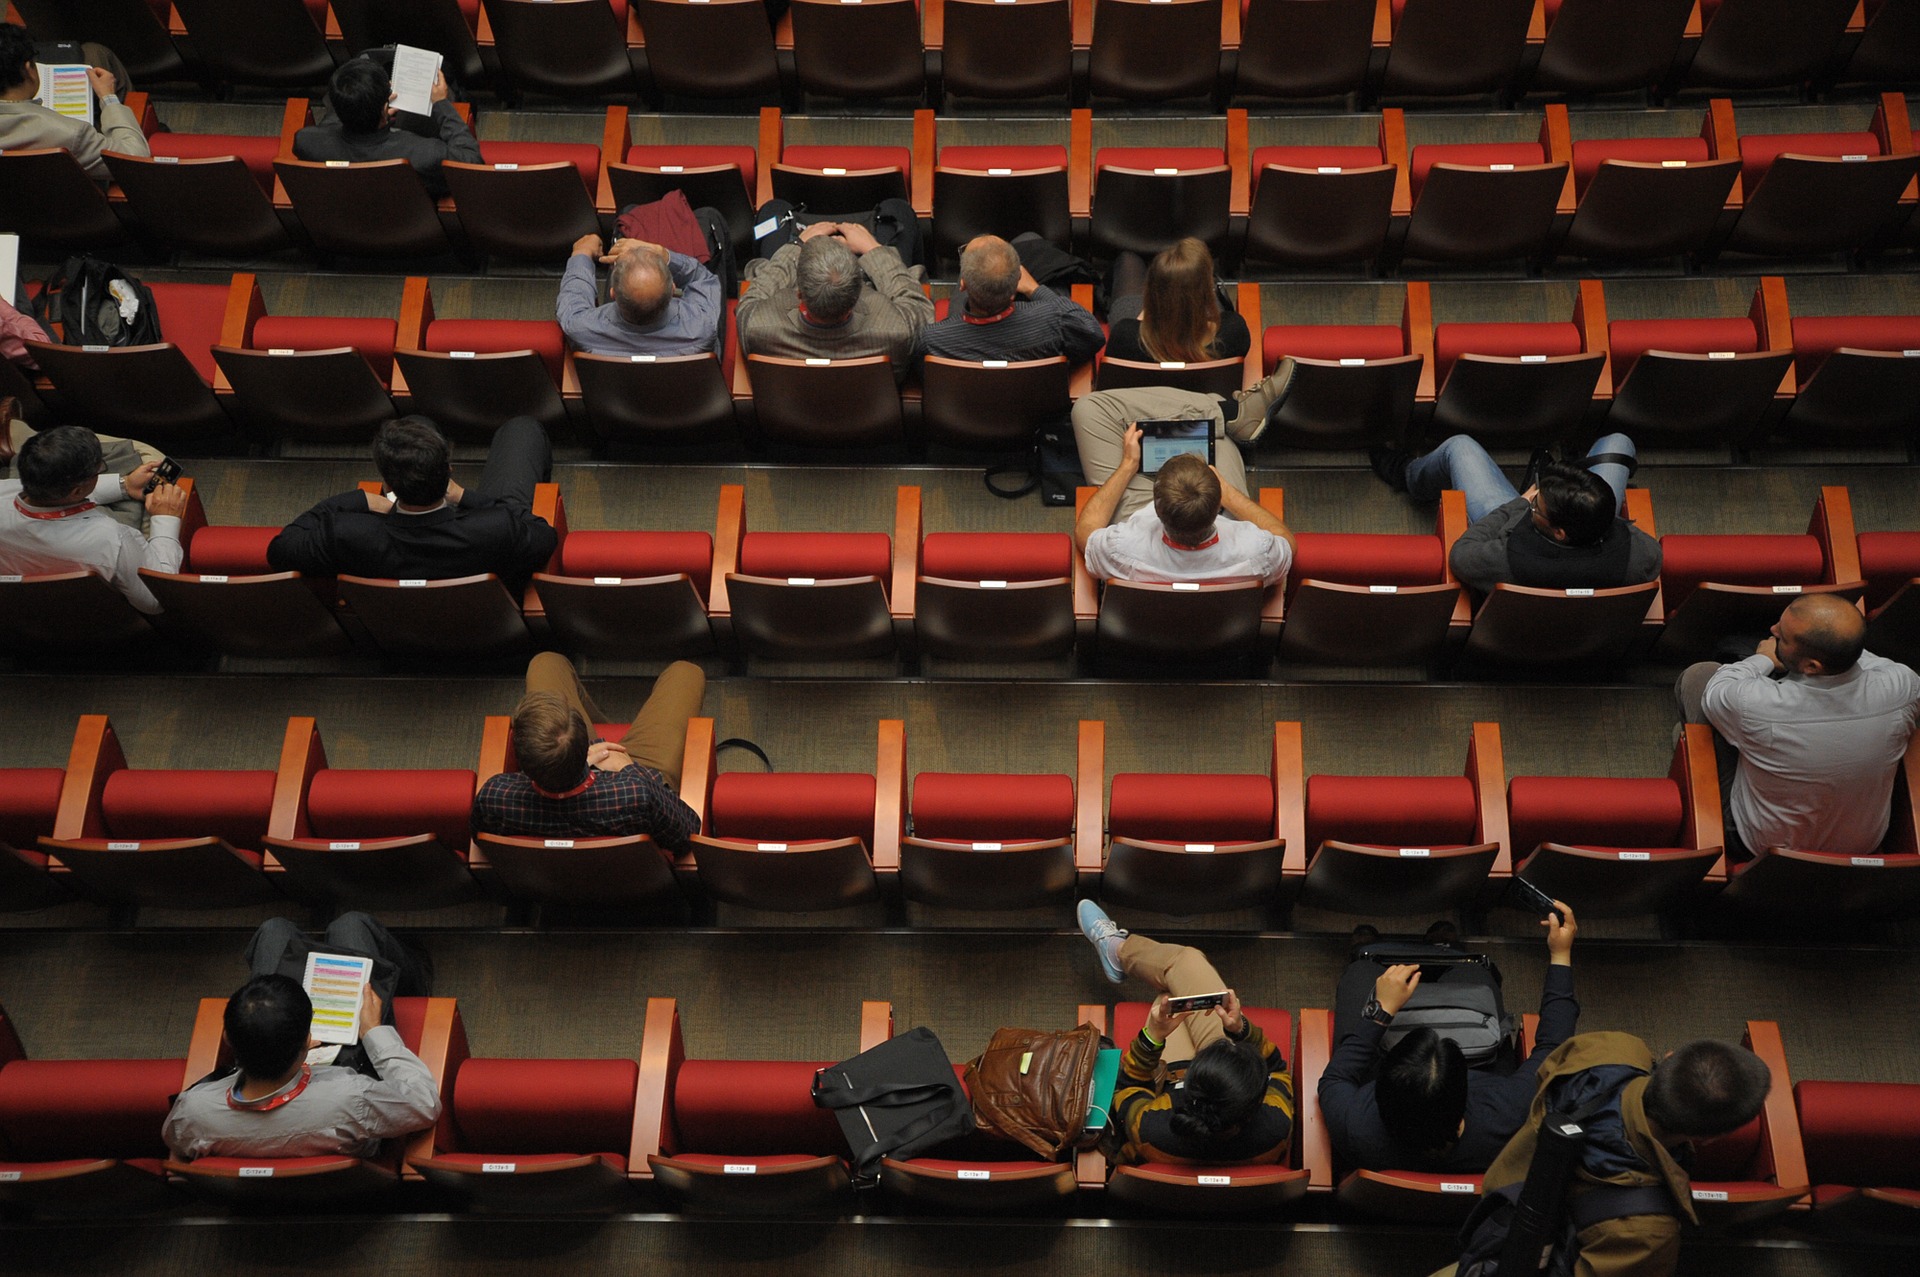 The audience listens to a speaker at a conference